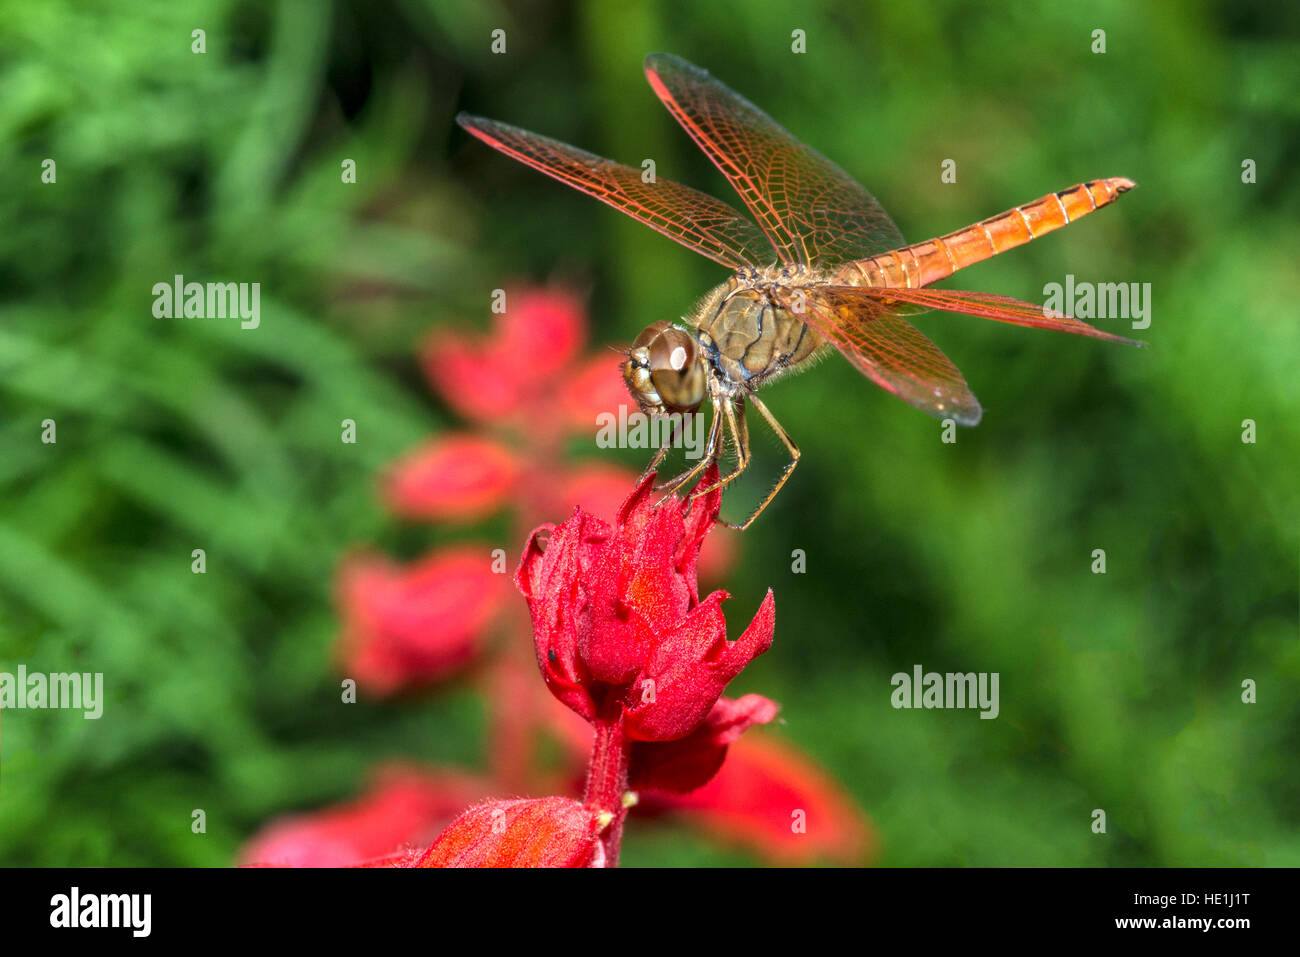 Closeup of dragonfly sitting on red flower Stock Photo